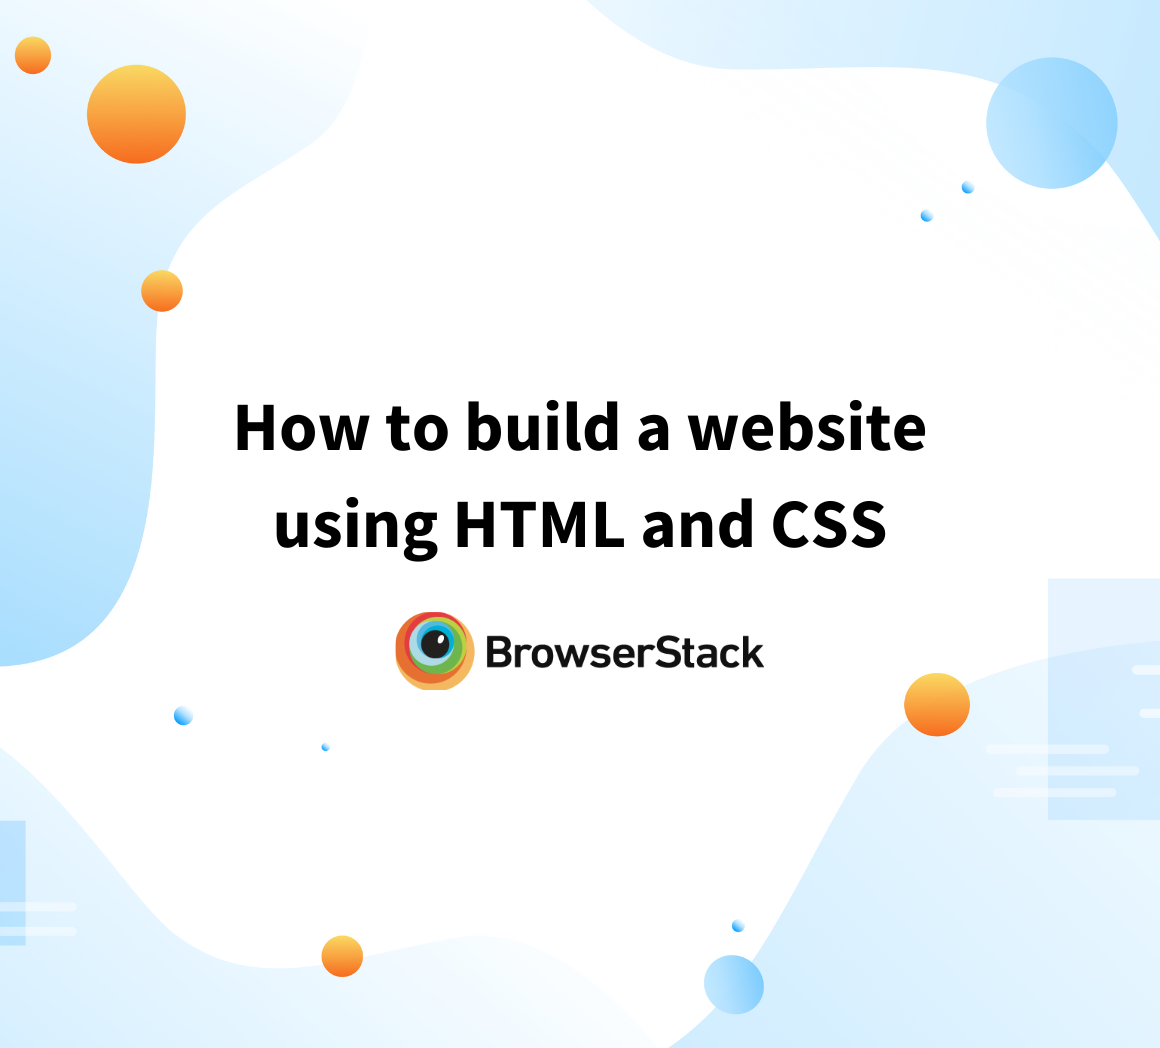 How to build a website using HTML and CSS